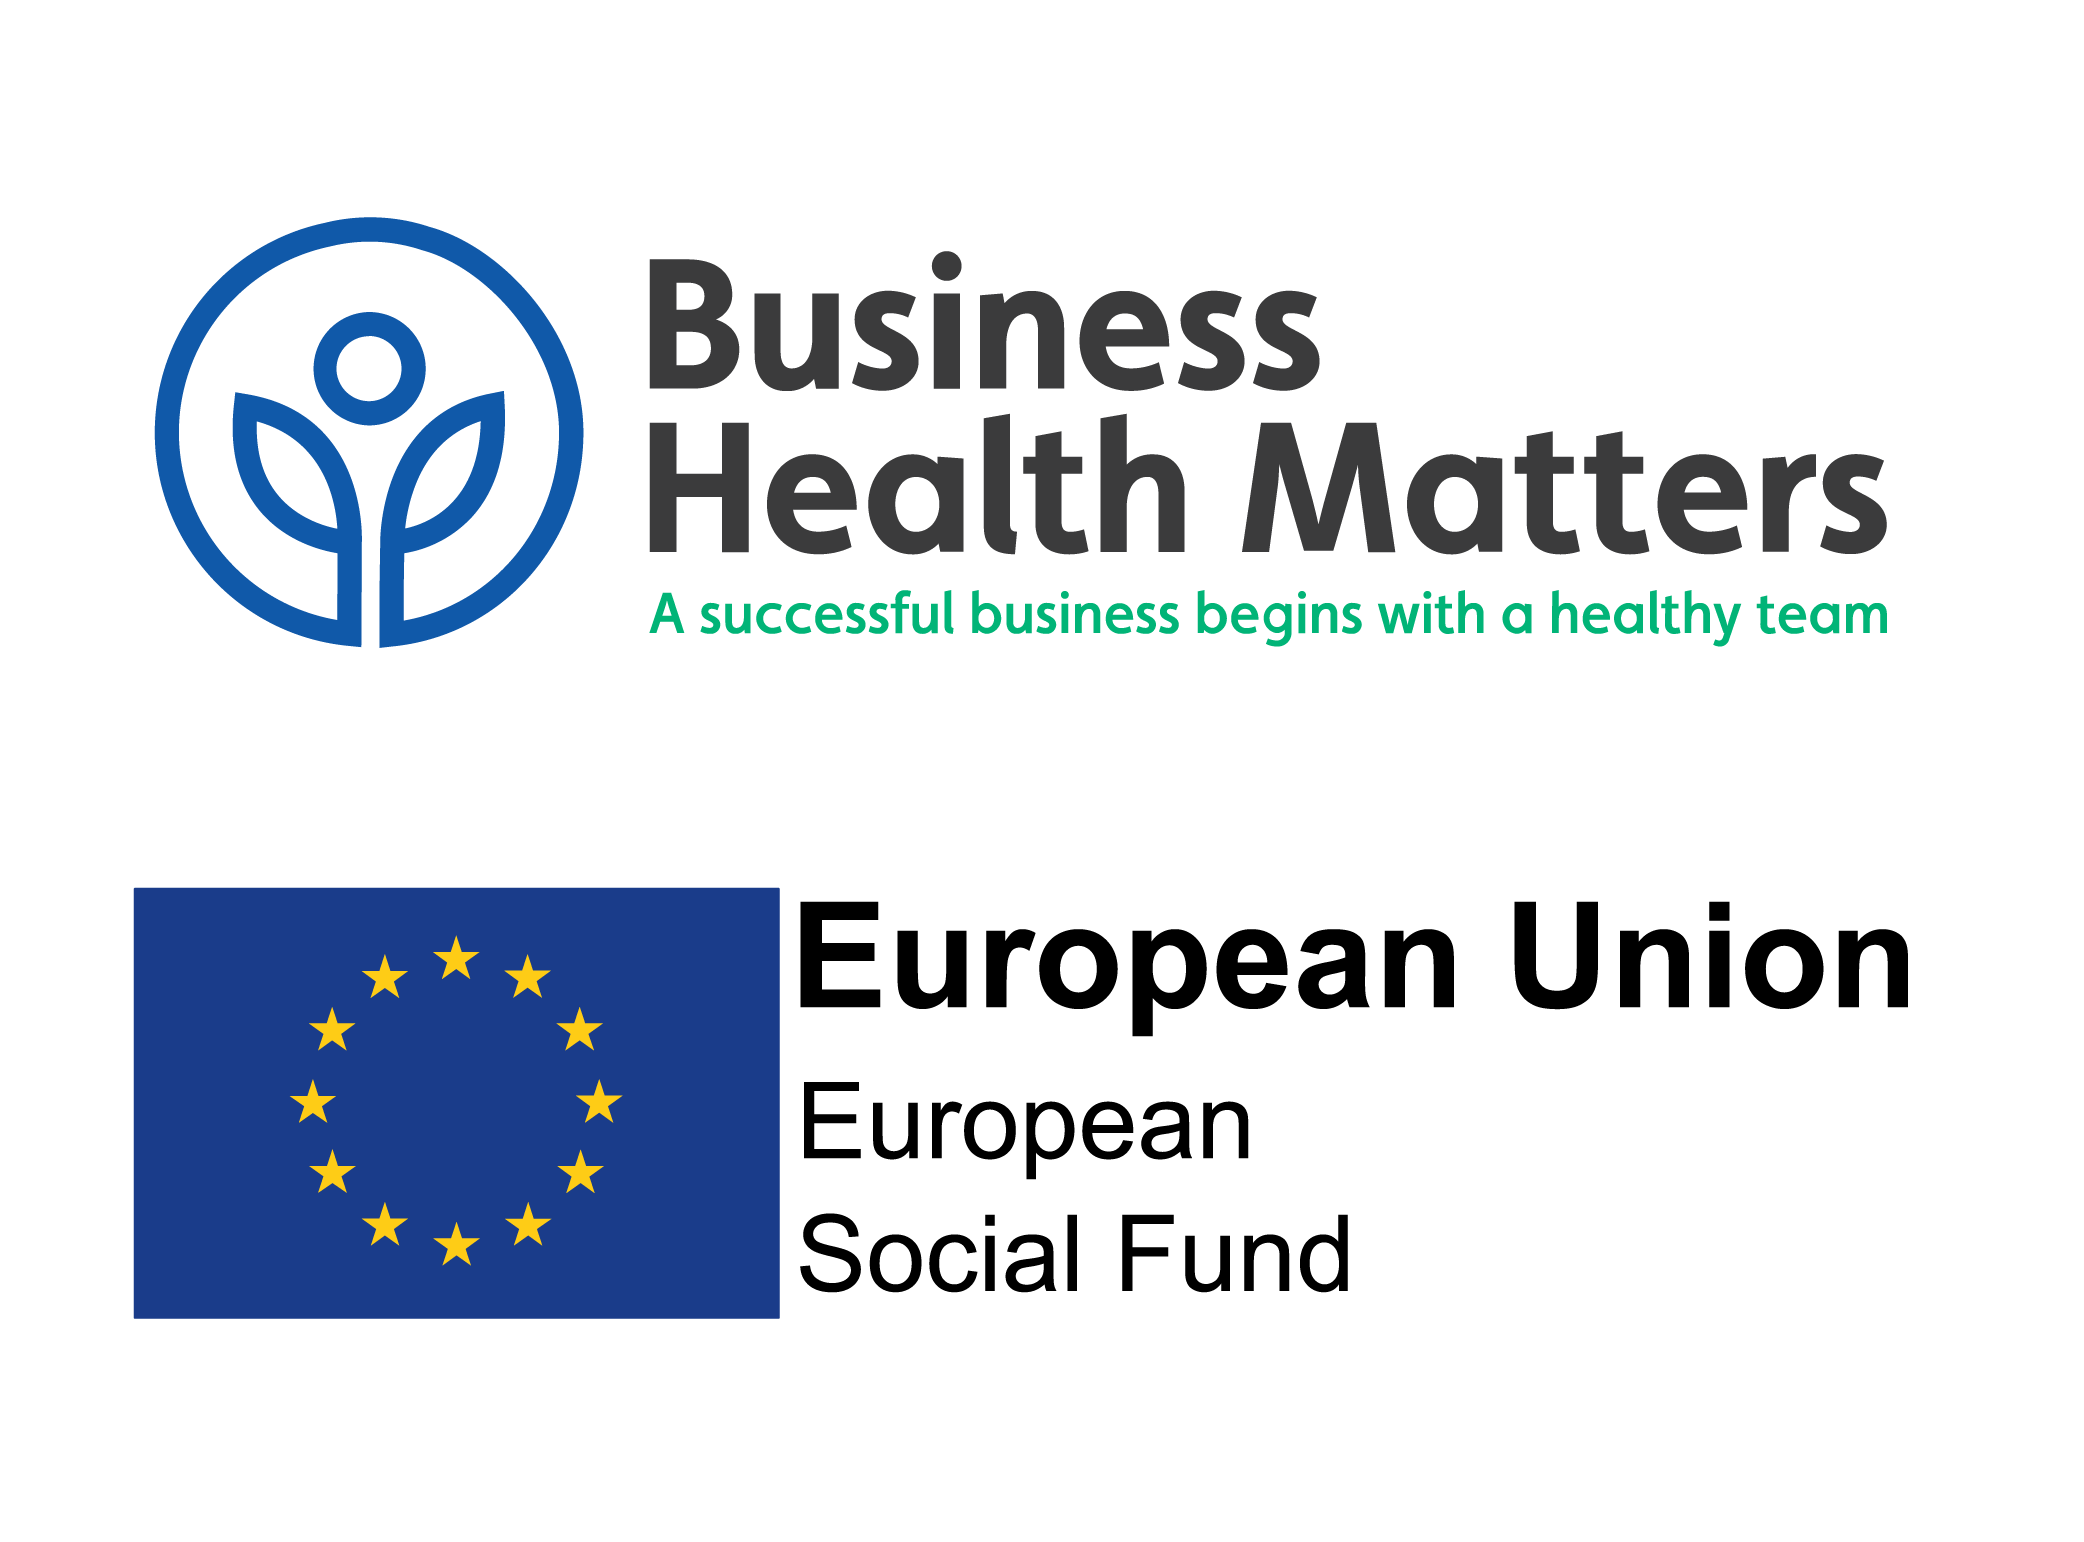 Business Health Matters